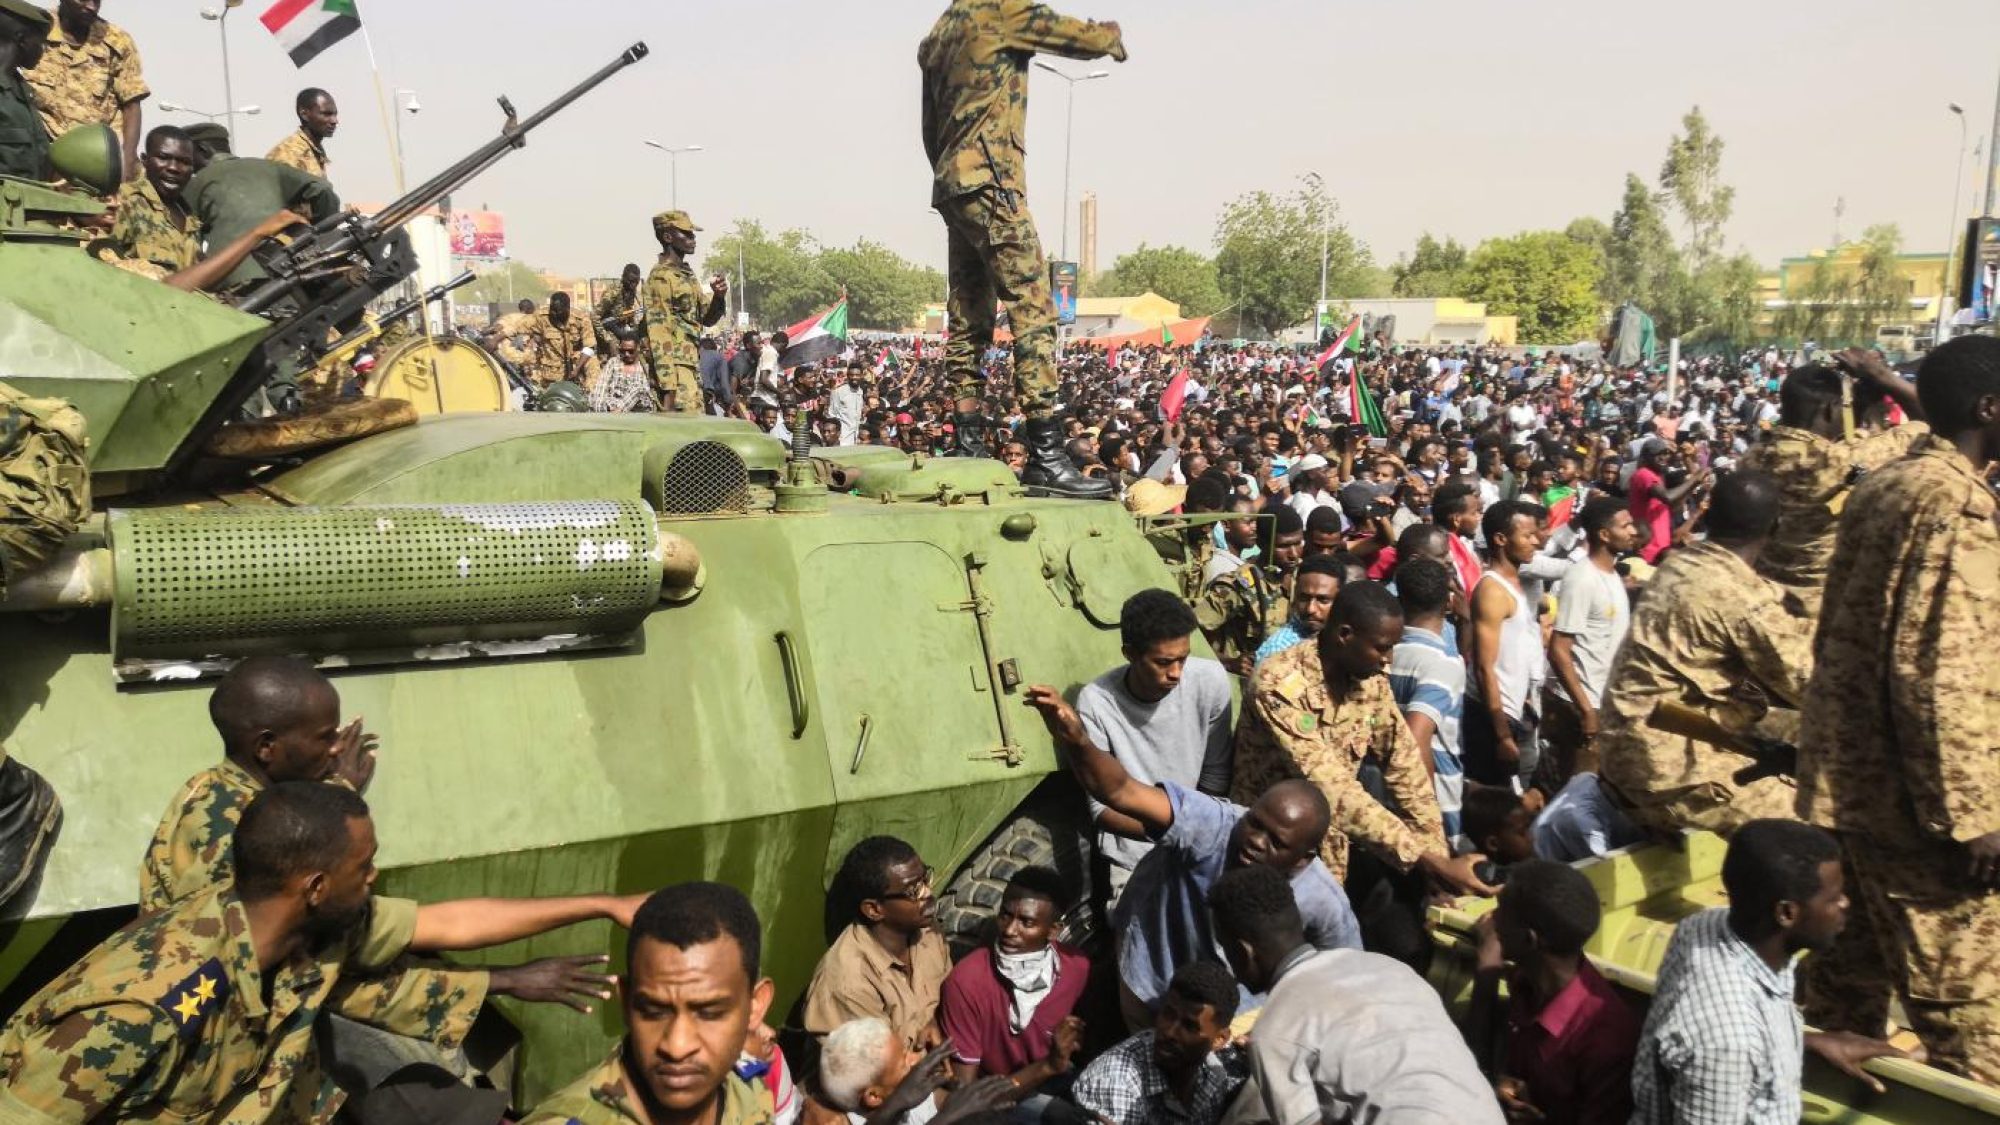 soldiers stand on tank in Sudan